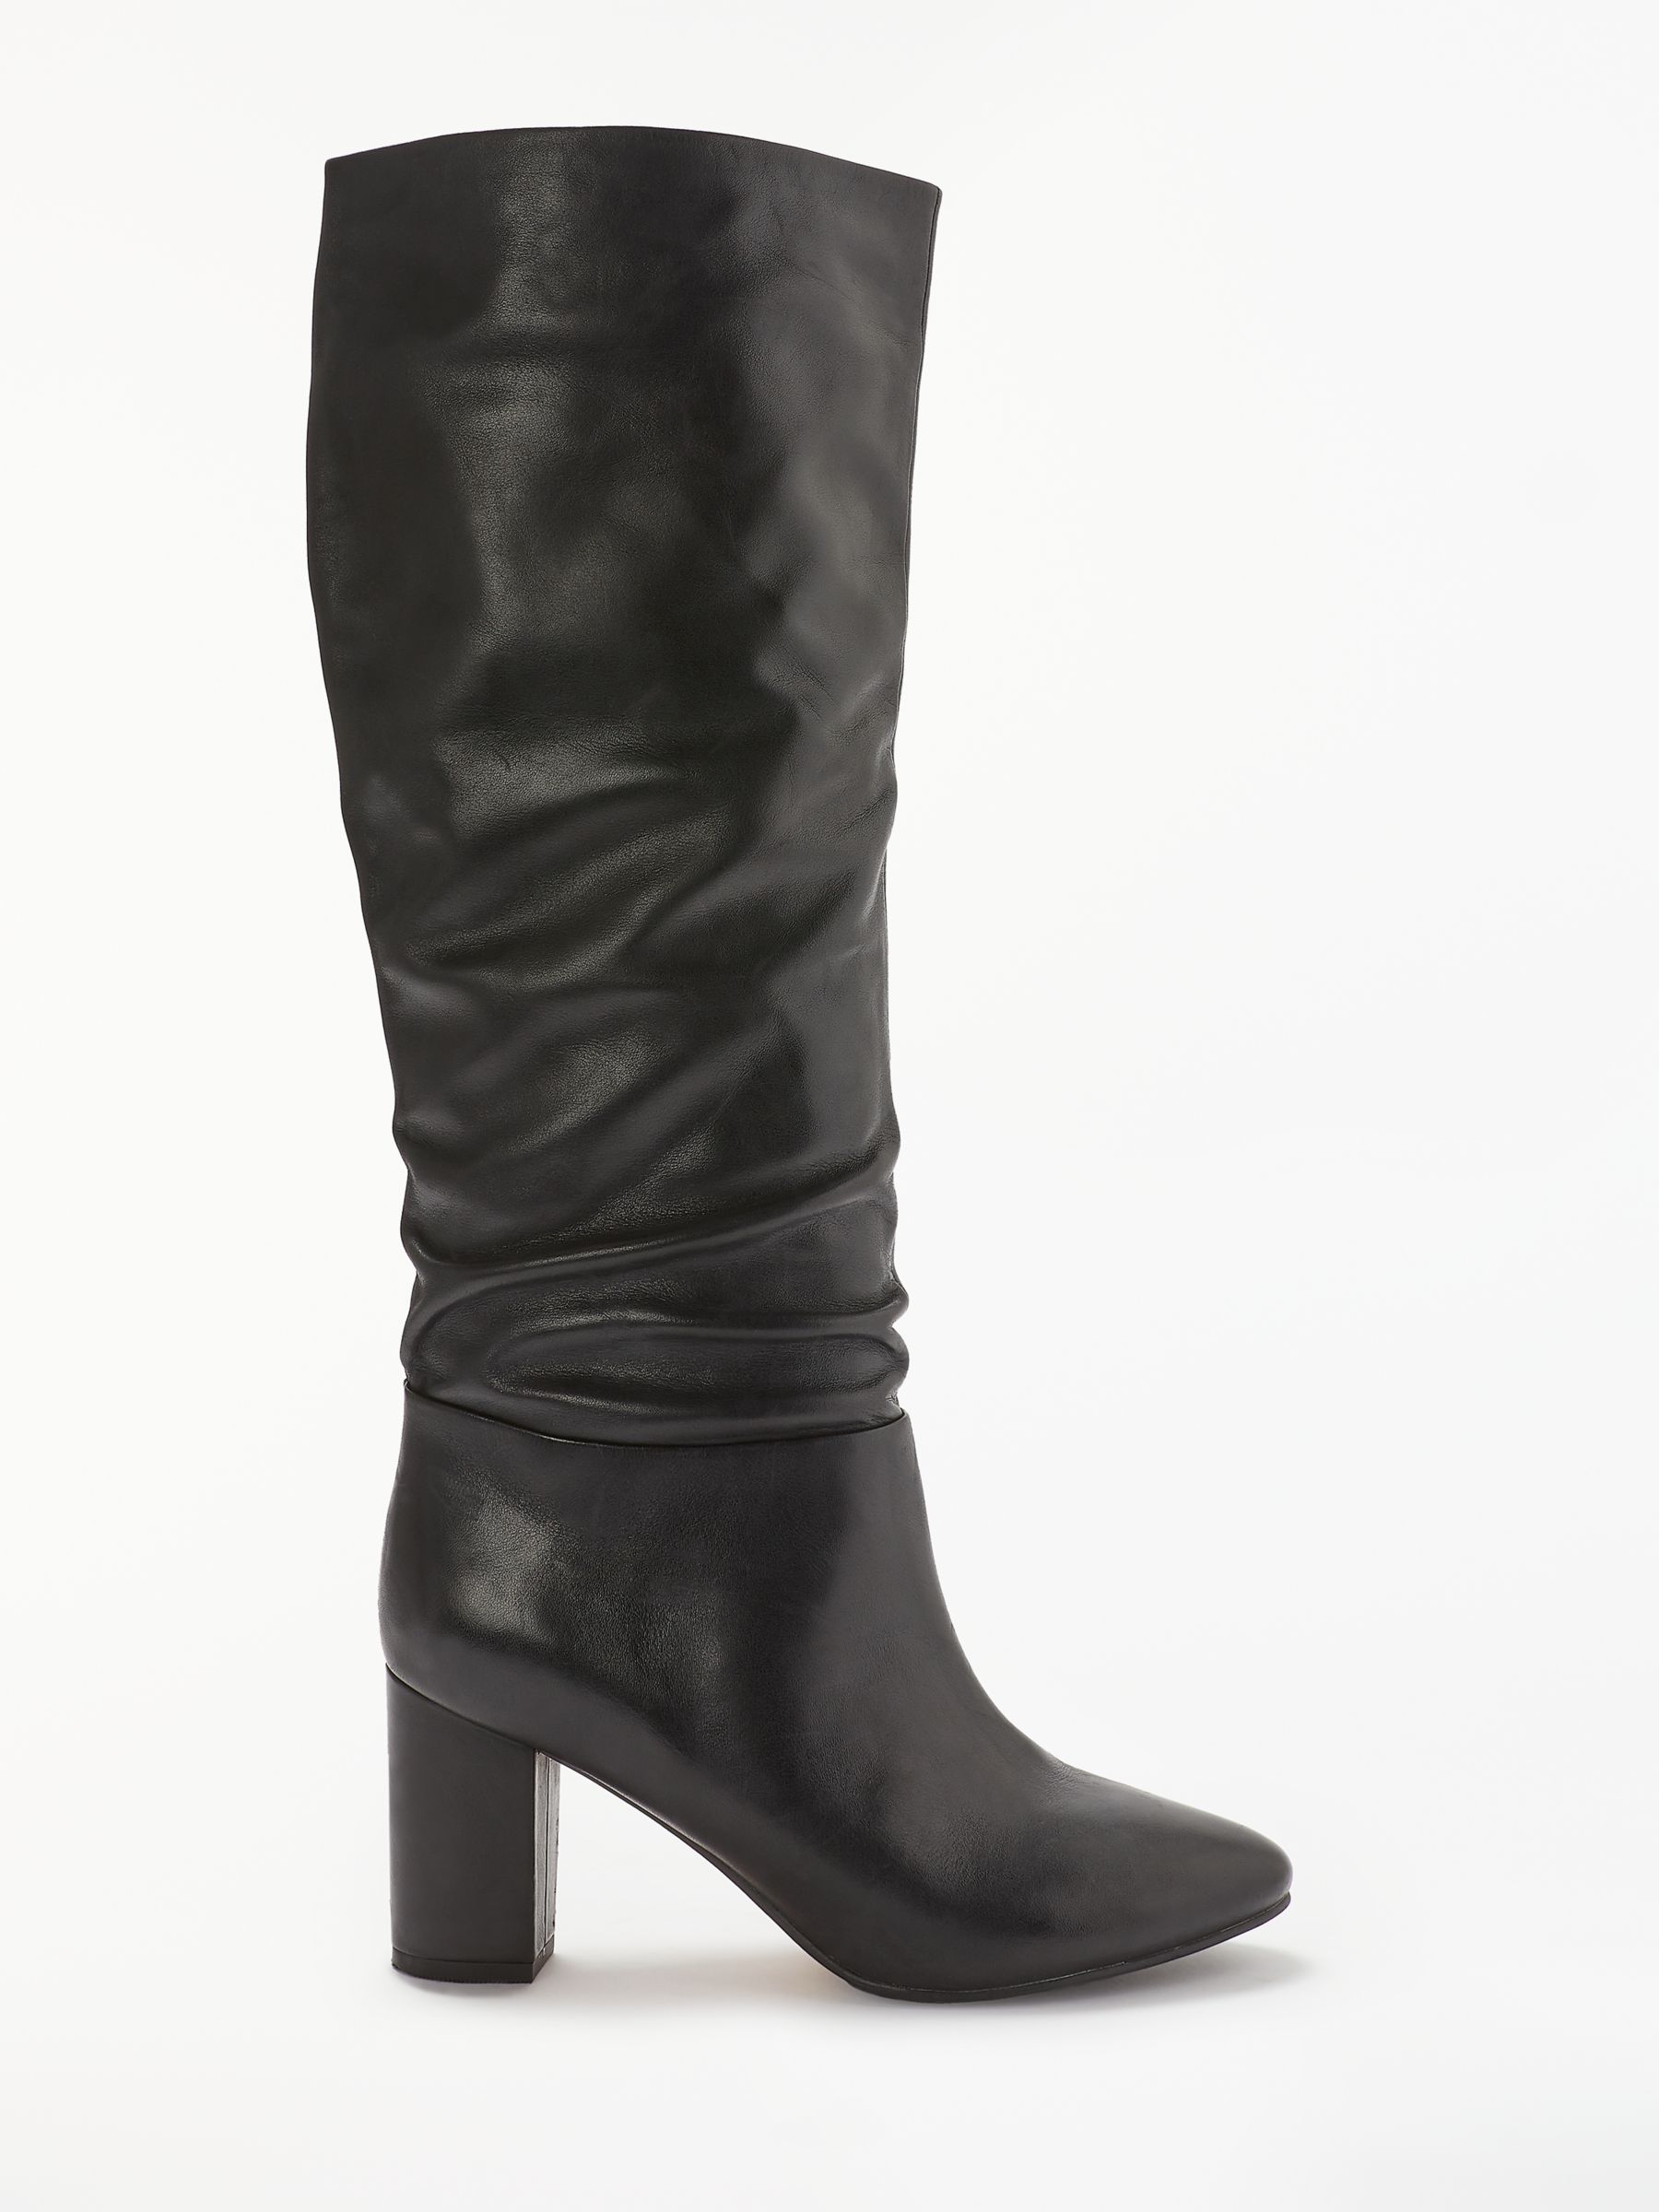 boden roseberry heeled boots